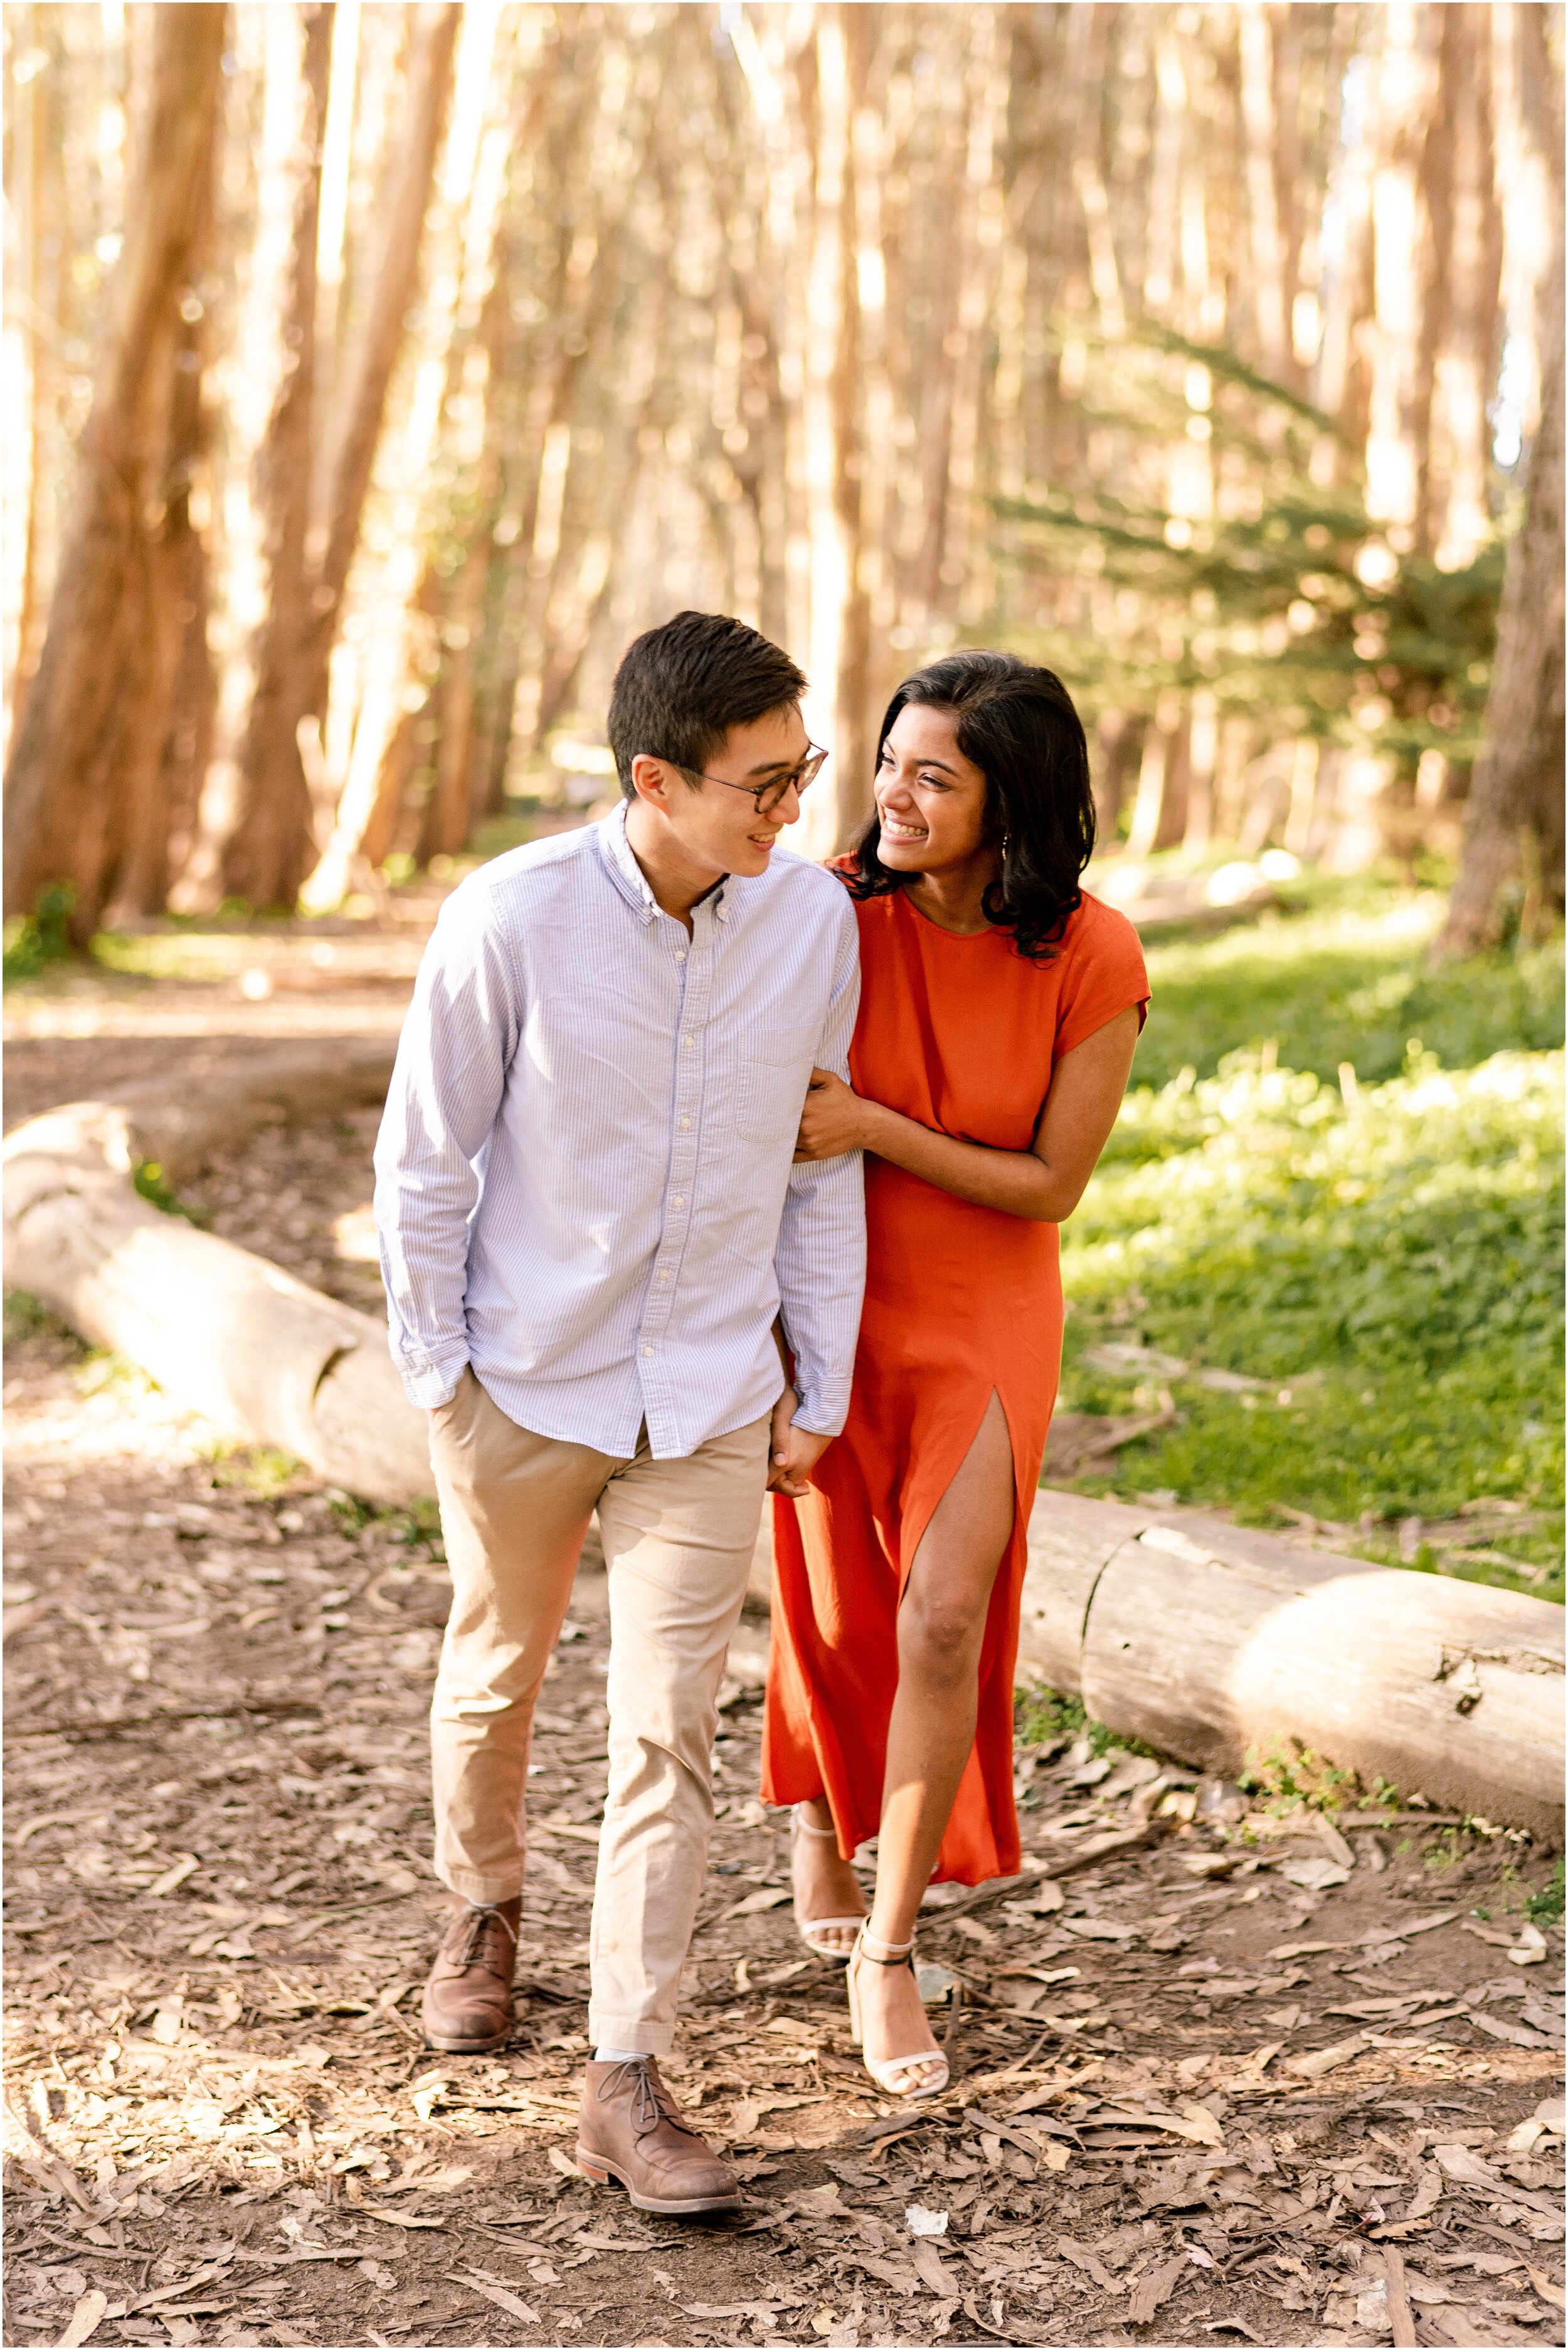 hannah leigh photography palace of fine arts engagement session san francisco CA_5588.jpg